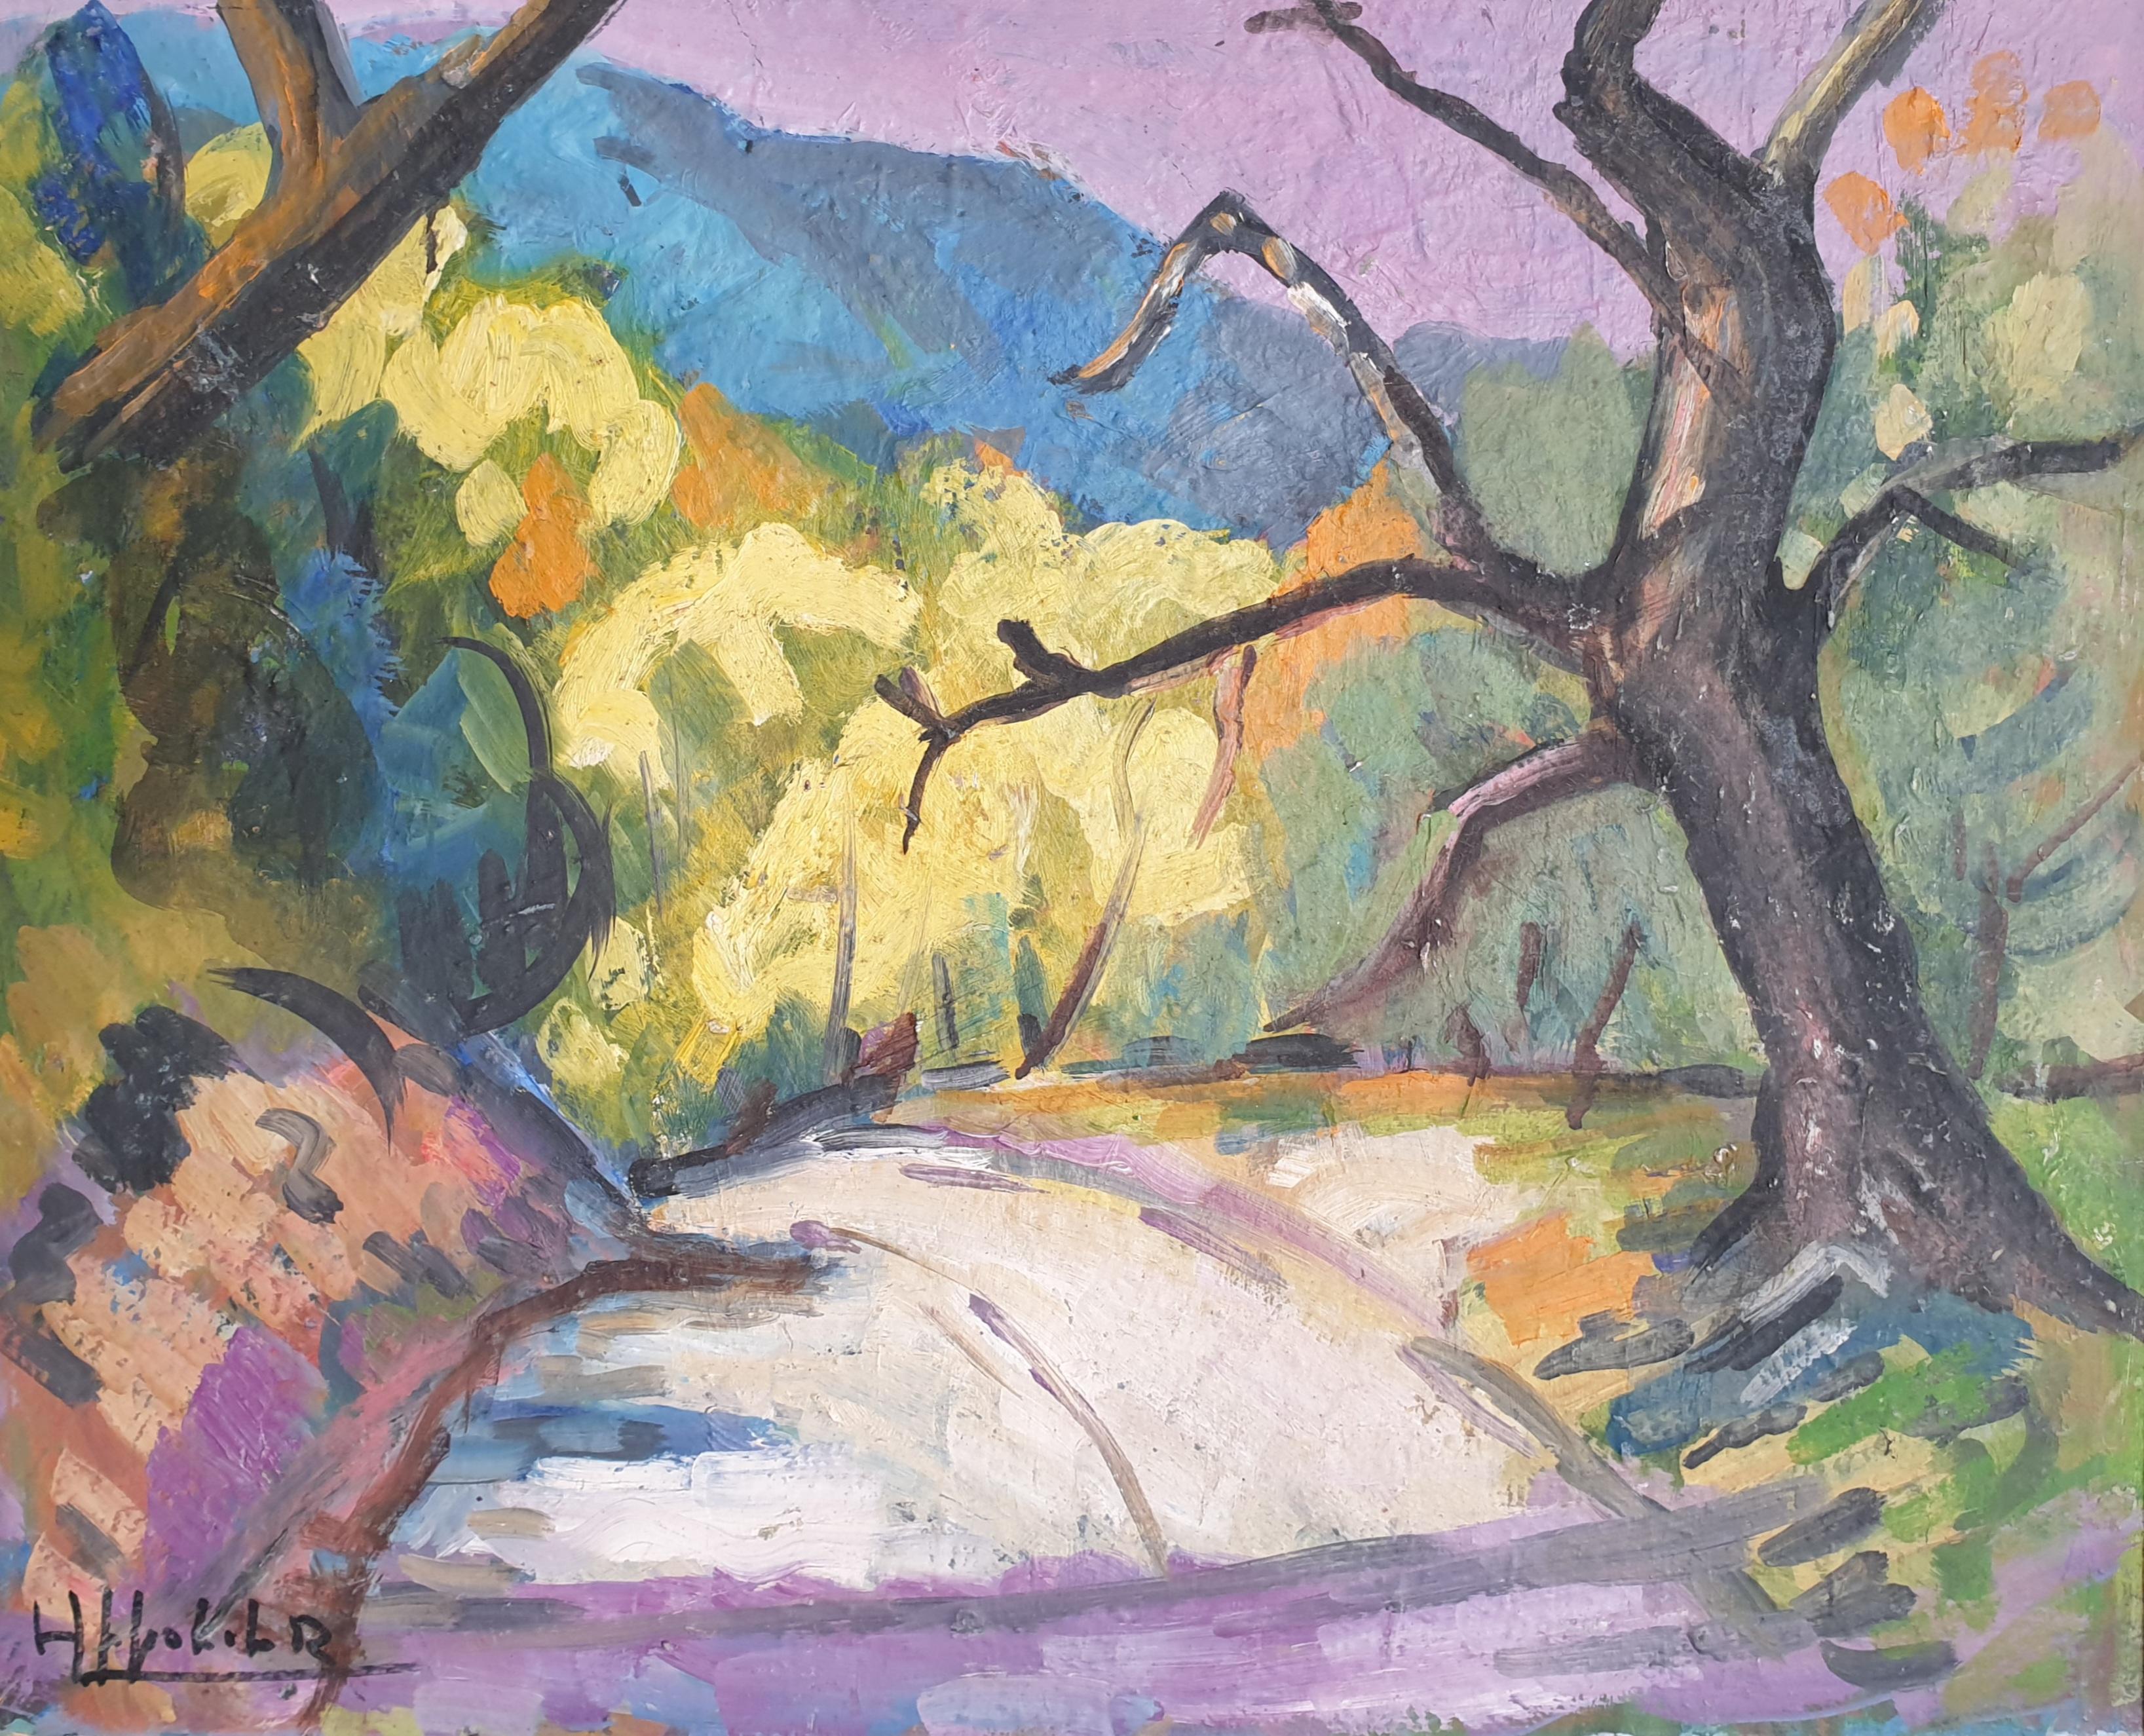 The Road, Mid-century Provençal, Fauvist Landscape. Oil on Board. - Painting by Hyppolite Roger